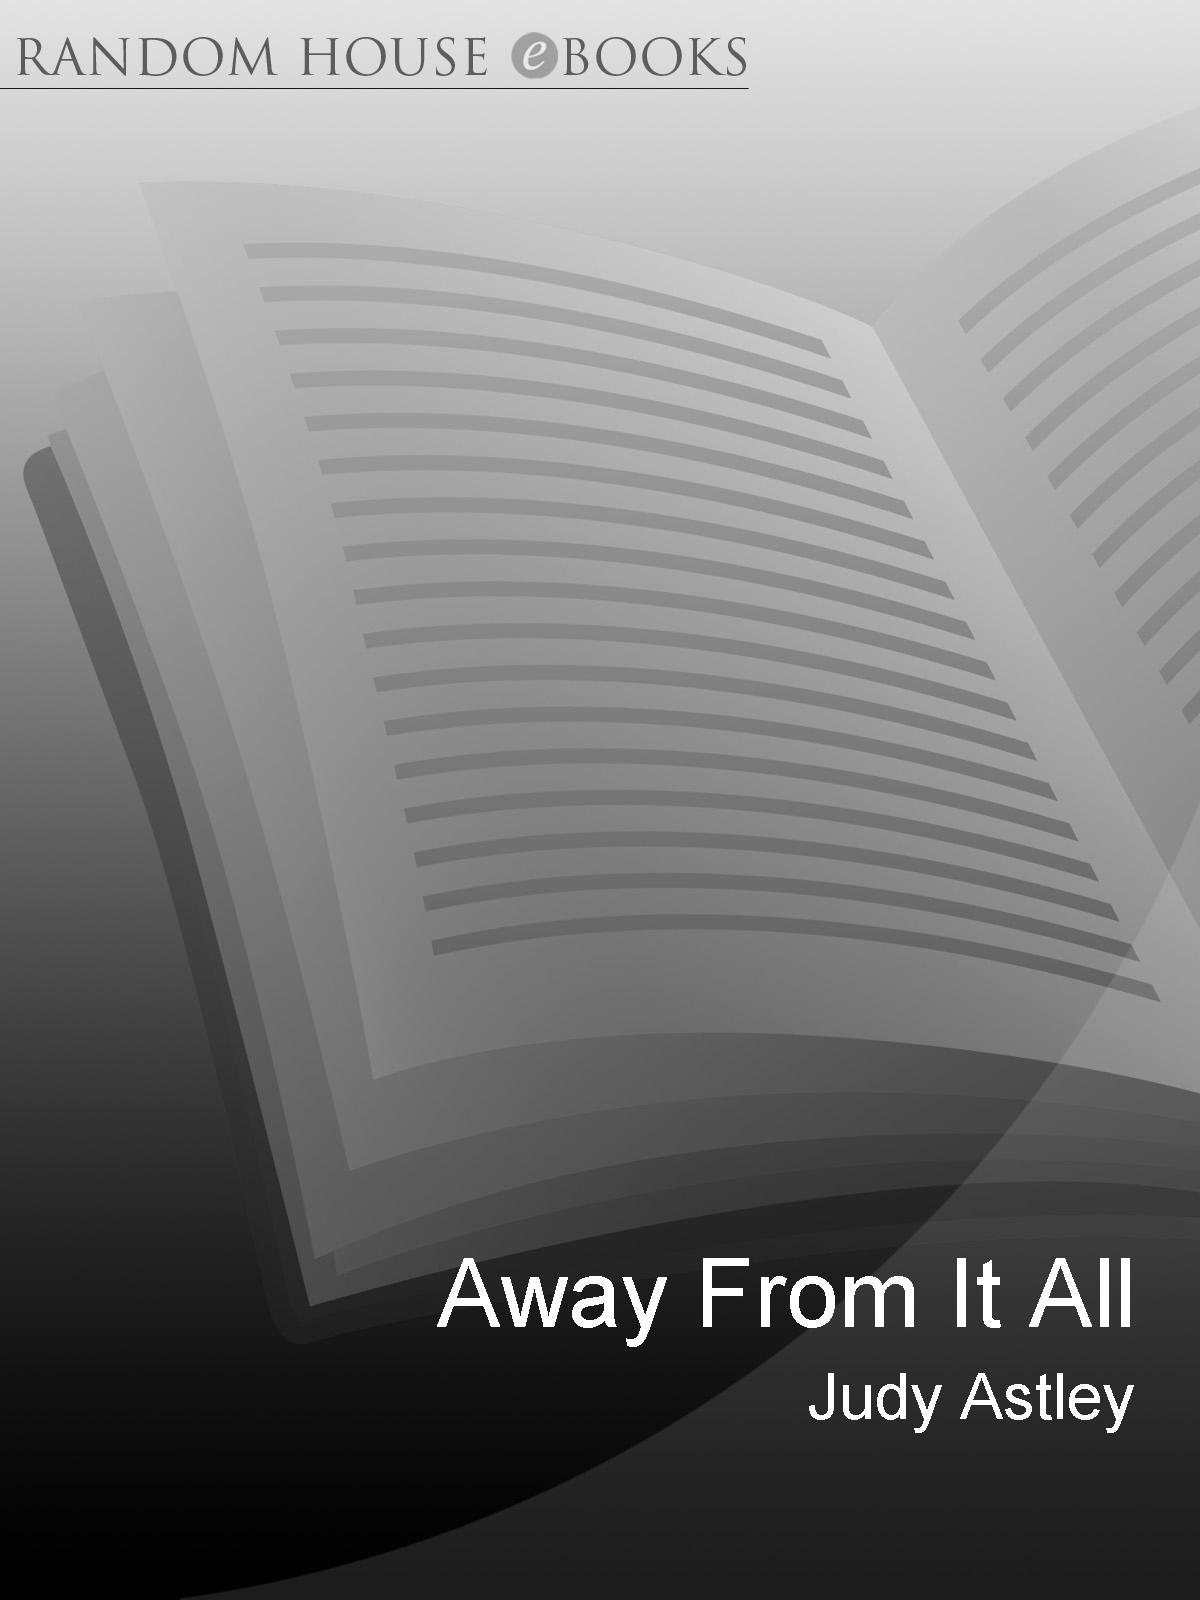 Away From It All (2003) by Judy Astley